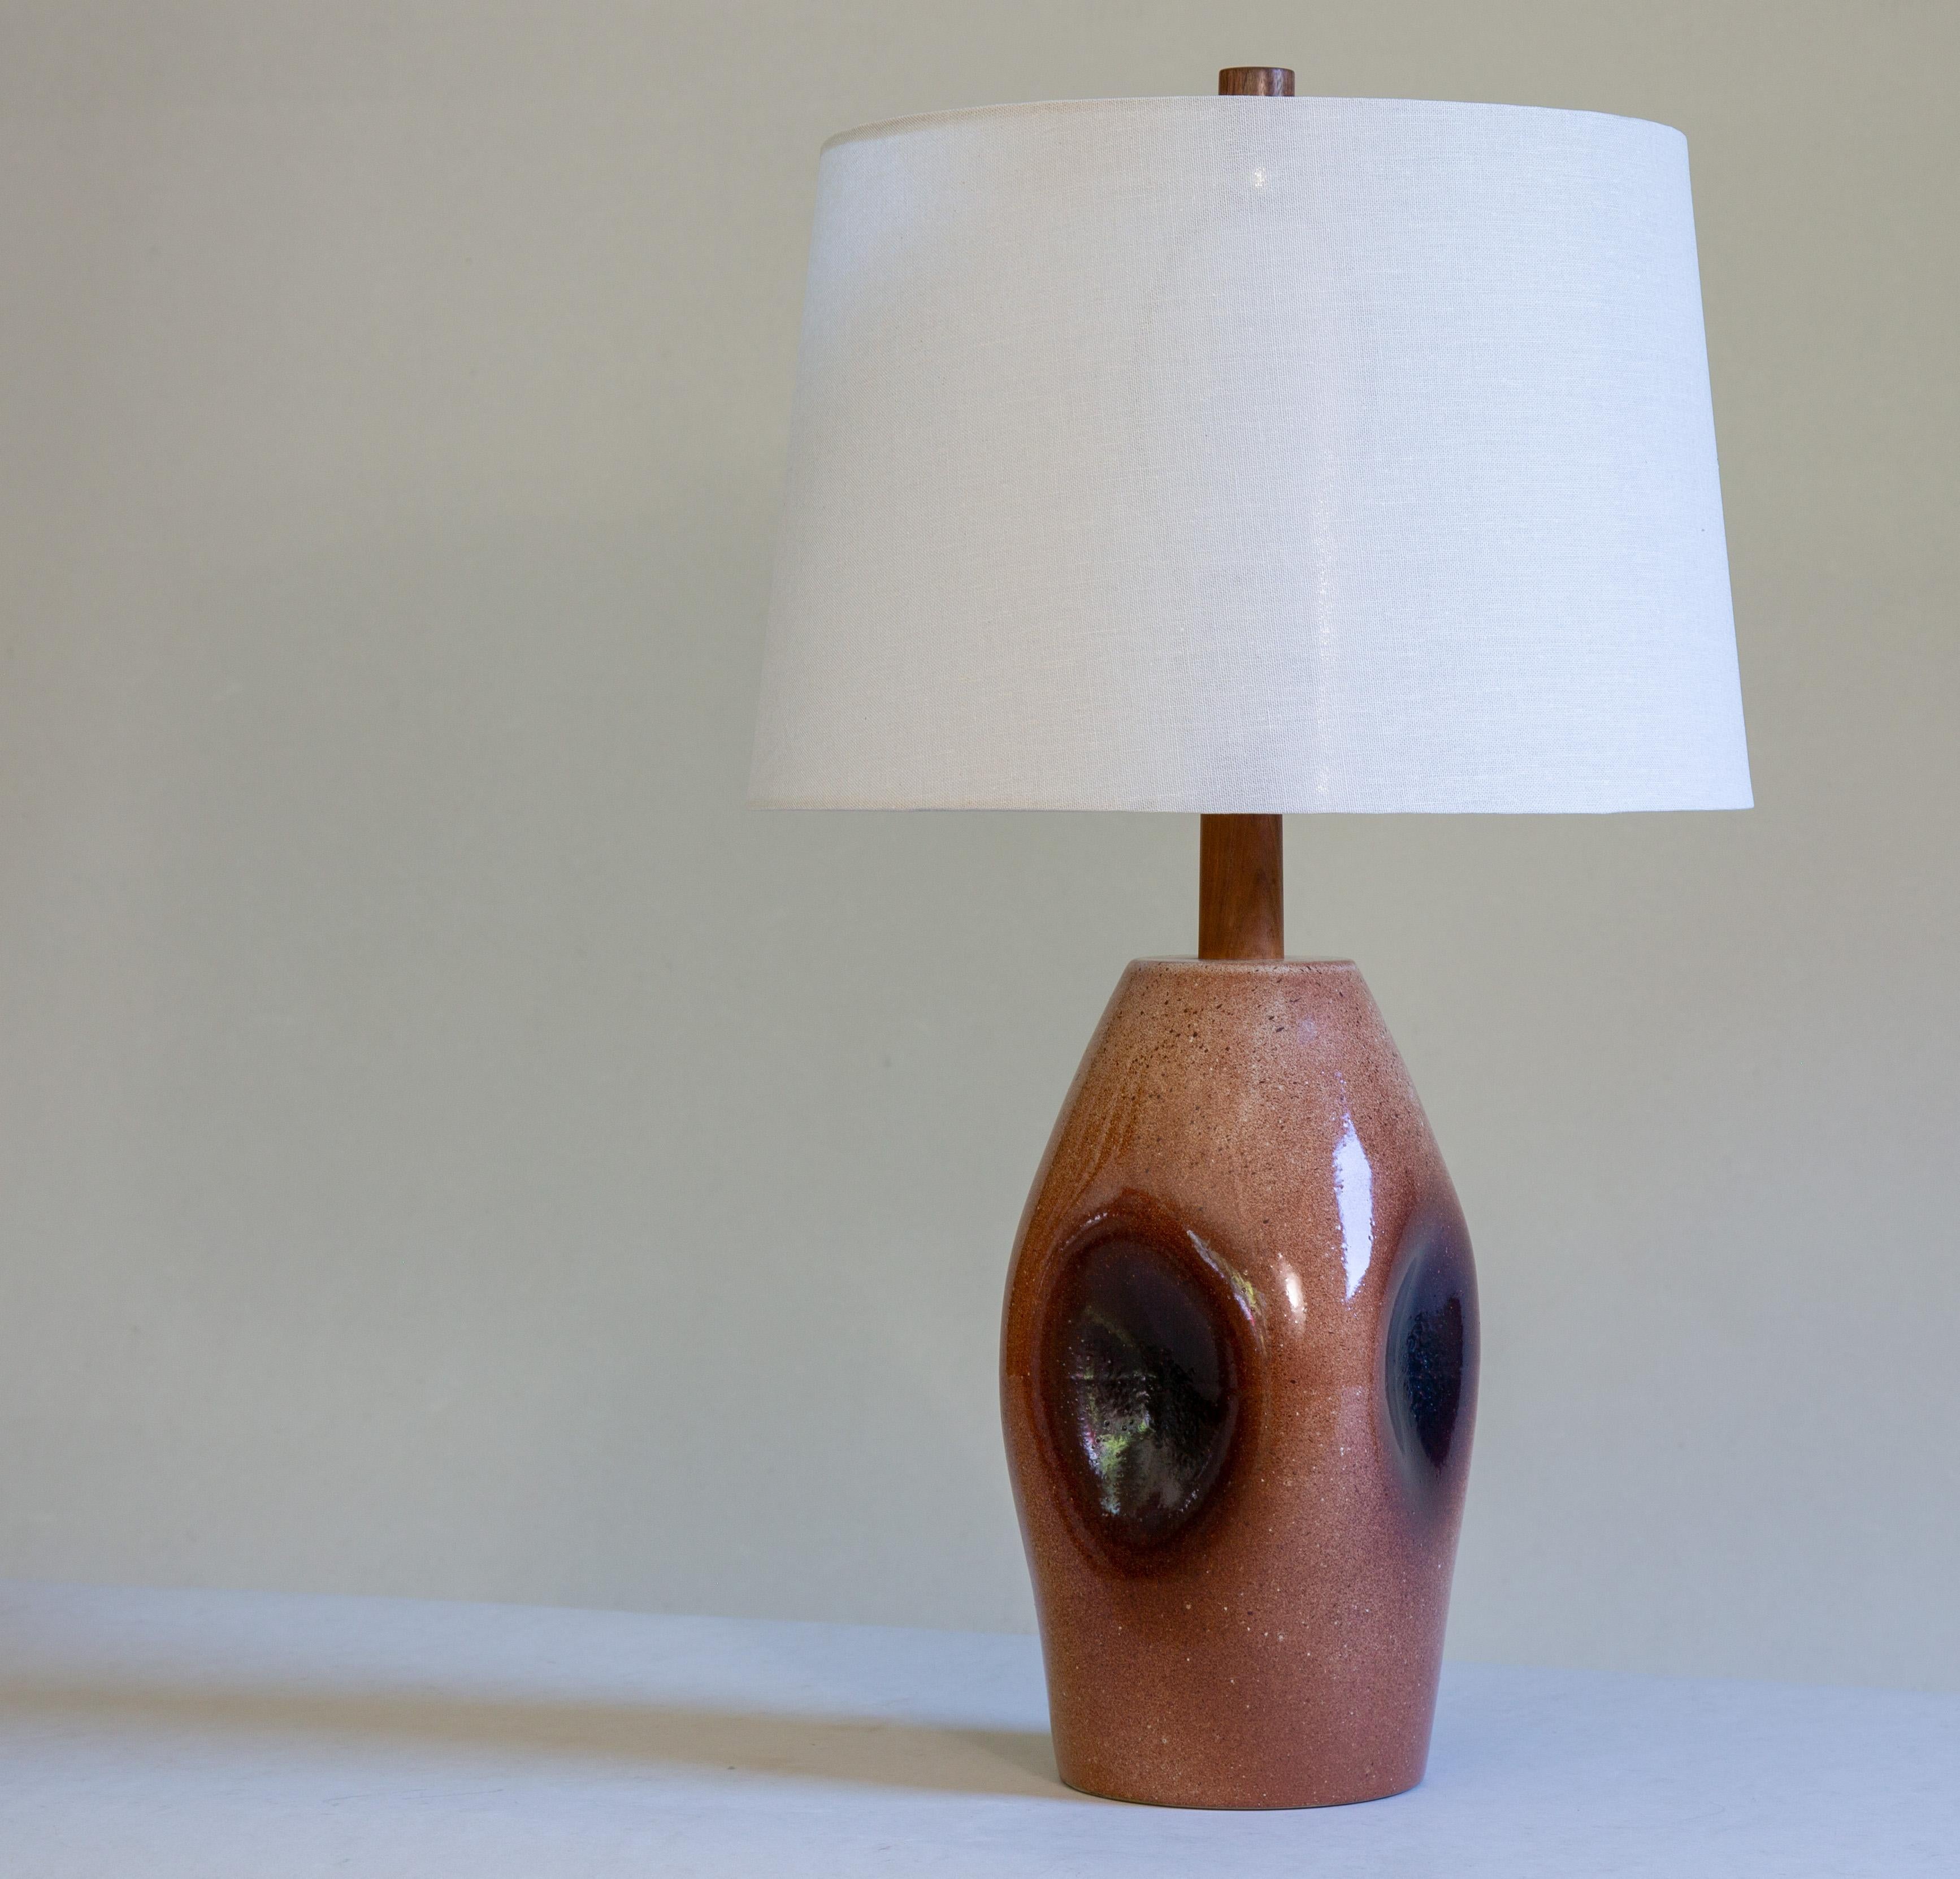 This lamp has a custom shape as confirmed by daughter Ann Martz, The shape never appears in any of the catalogues and was likely a firing mishap that turned in to a one off custom lamp.  Dimpled on 4 edges the glaze accumulates in the dimples and